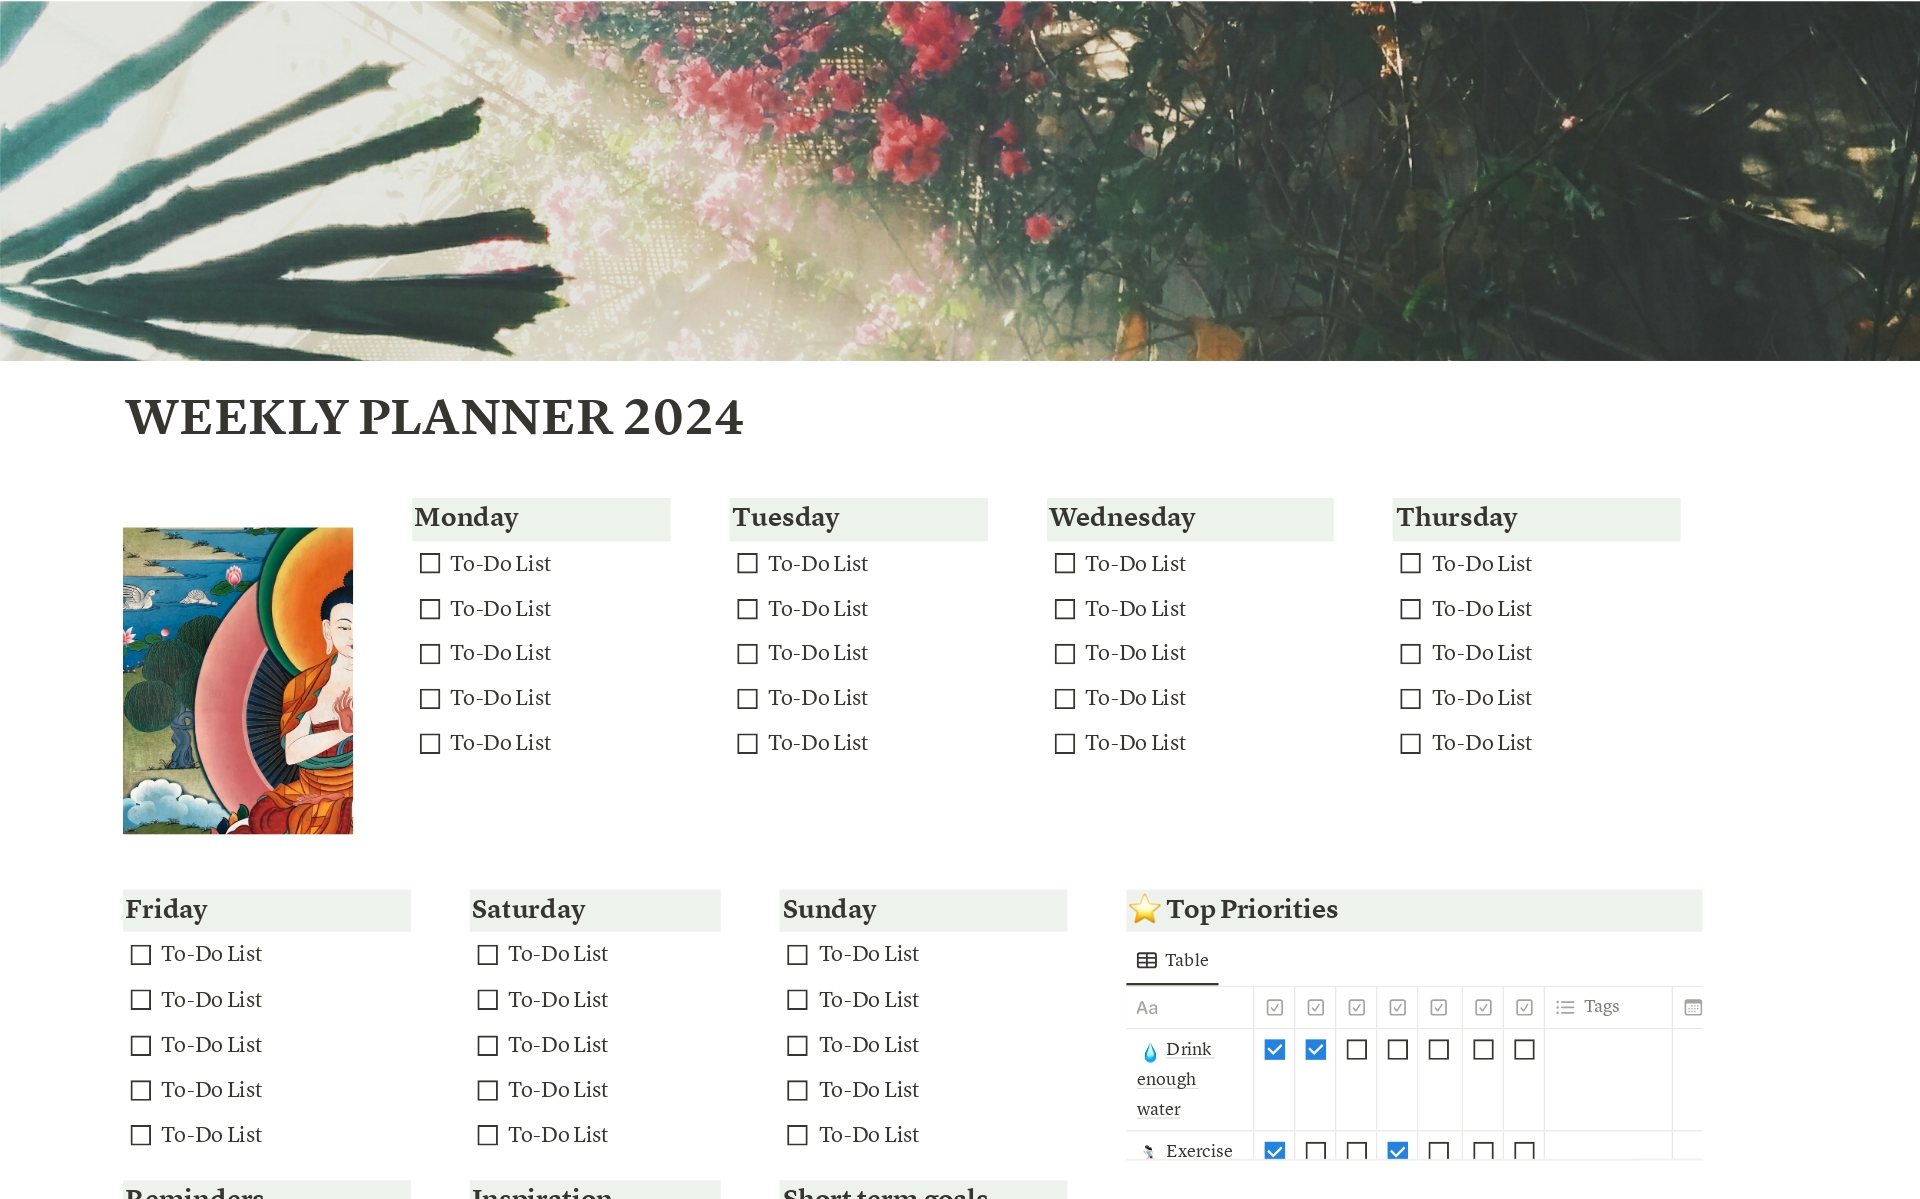 Prioritise yourself every day with this digital planner template and checklist!